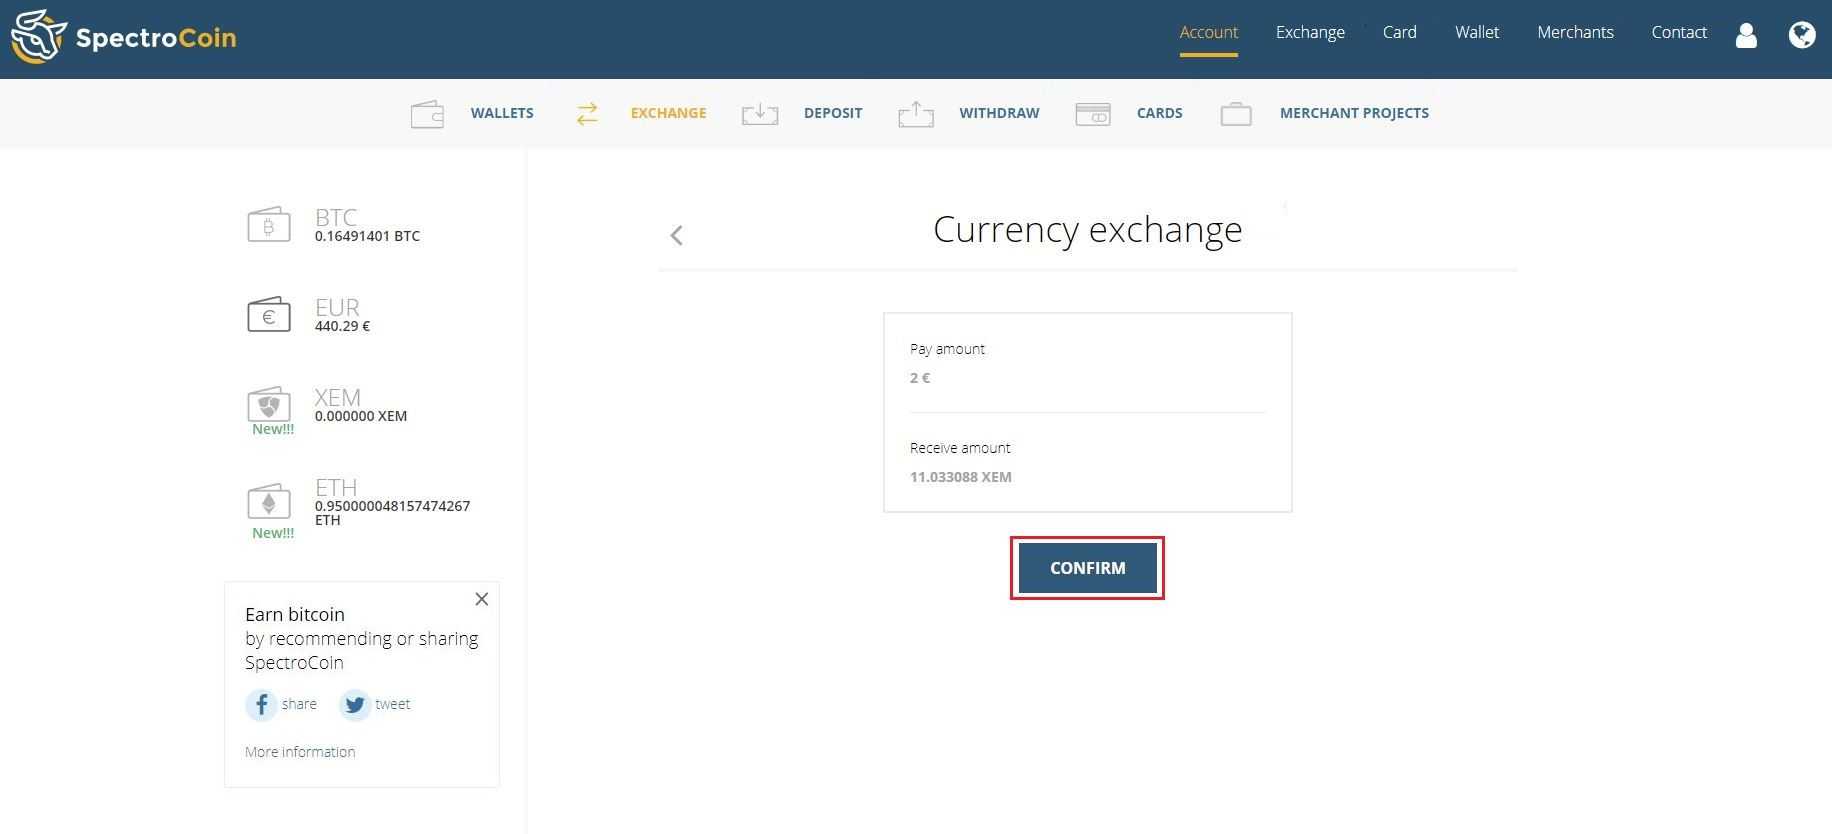 SpectroCoin currency exchange confirmation window